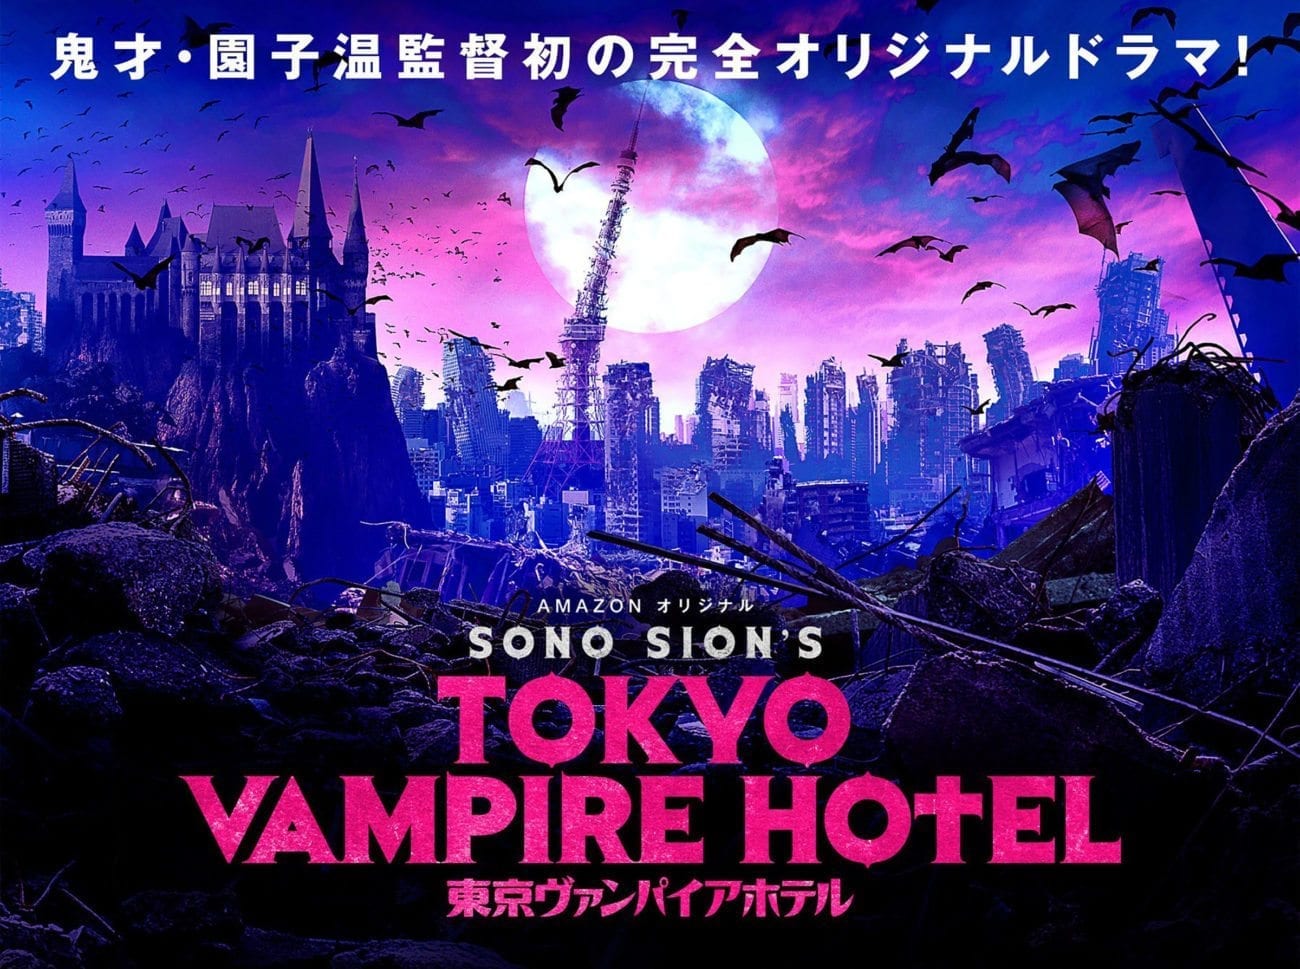 Amazon Prime Video will be streaming all nine episodes of Sion Sono’s upcoming series 'Tokyo Vampire Hotel' exclusively in Japan this June.